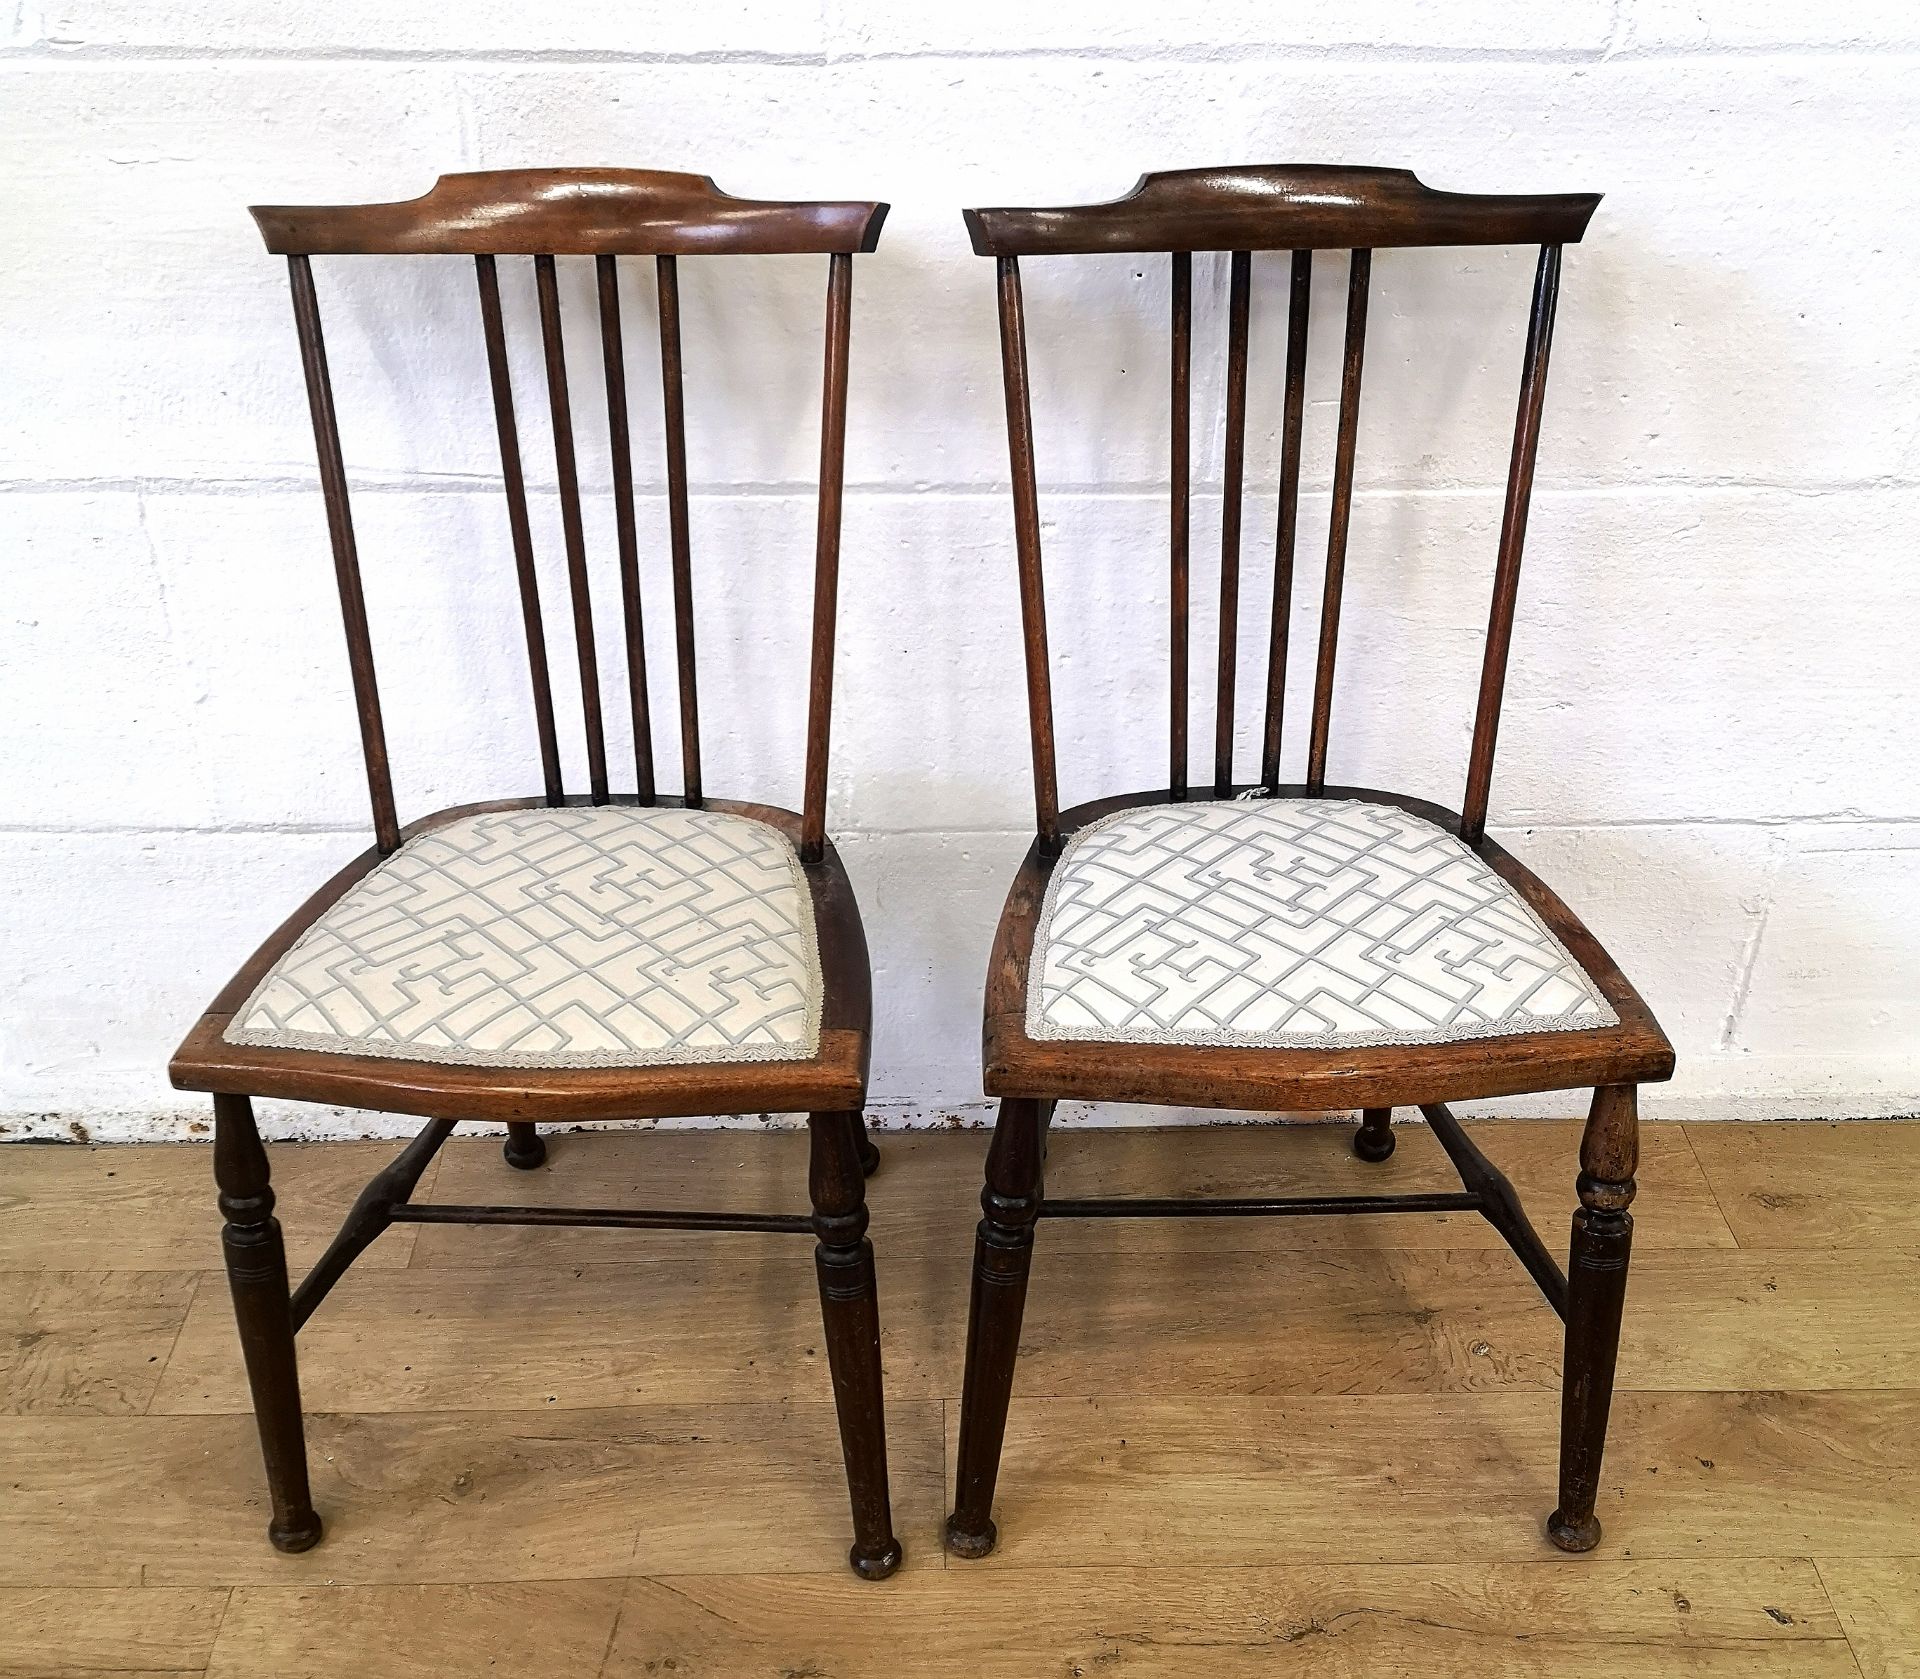 Two mahogany childrens bedroom chairs